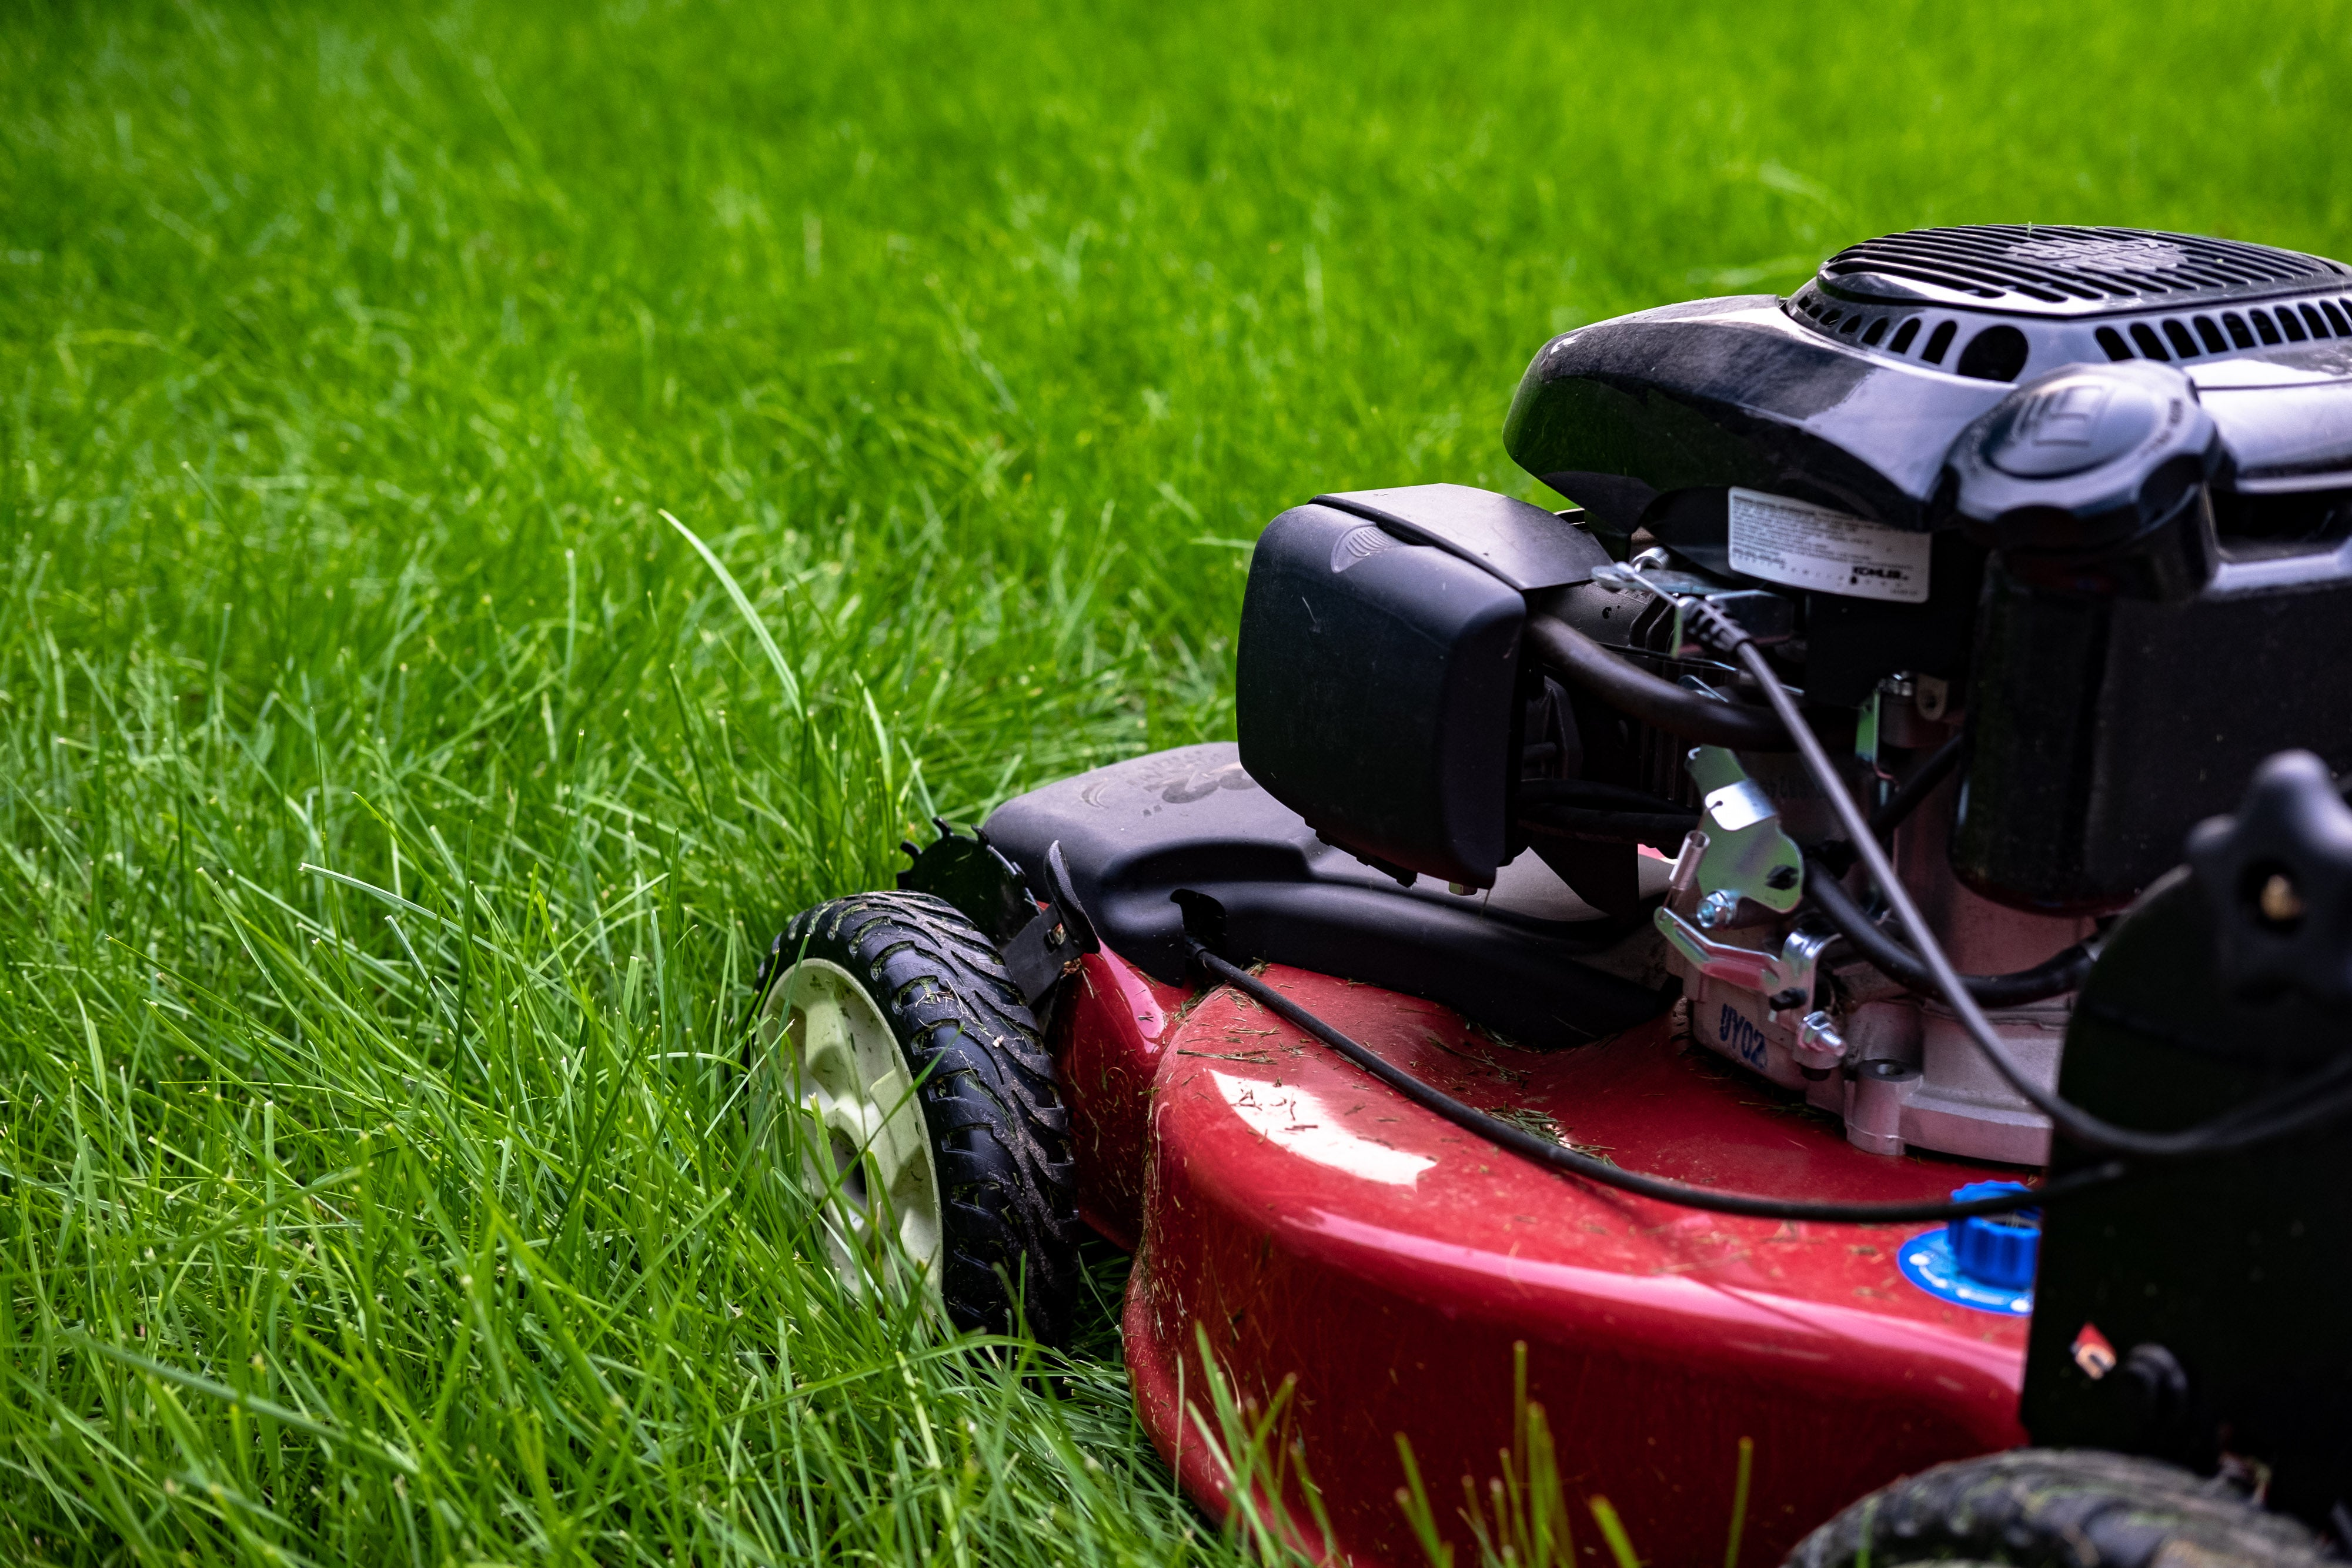 Now is the time to prep your lawn for spring